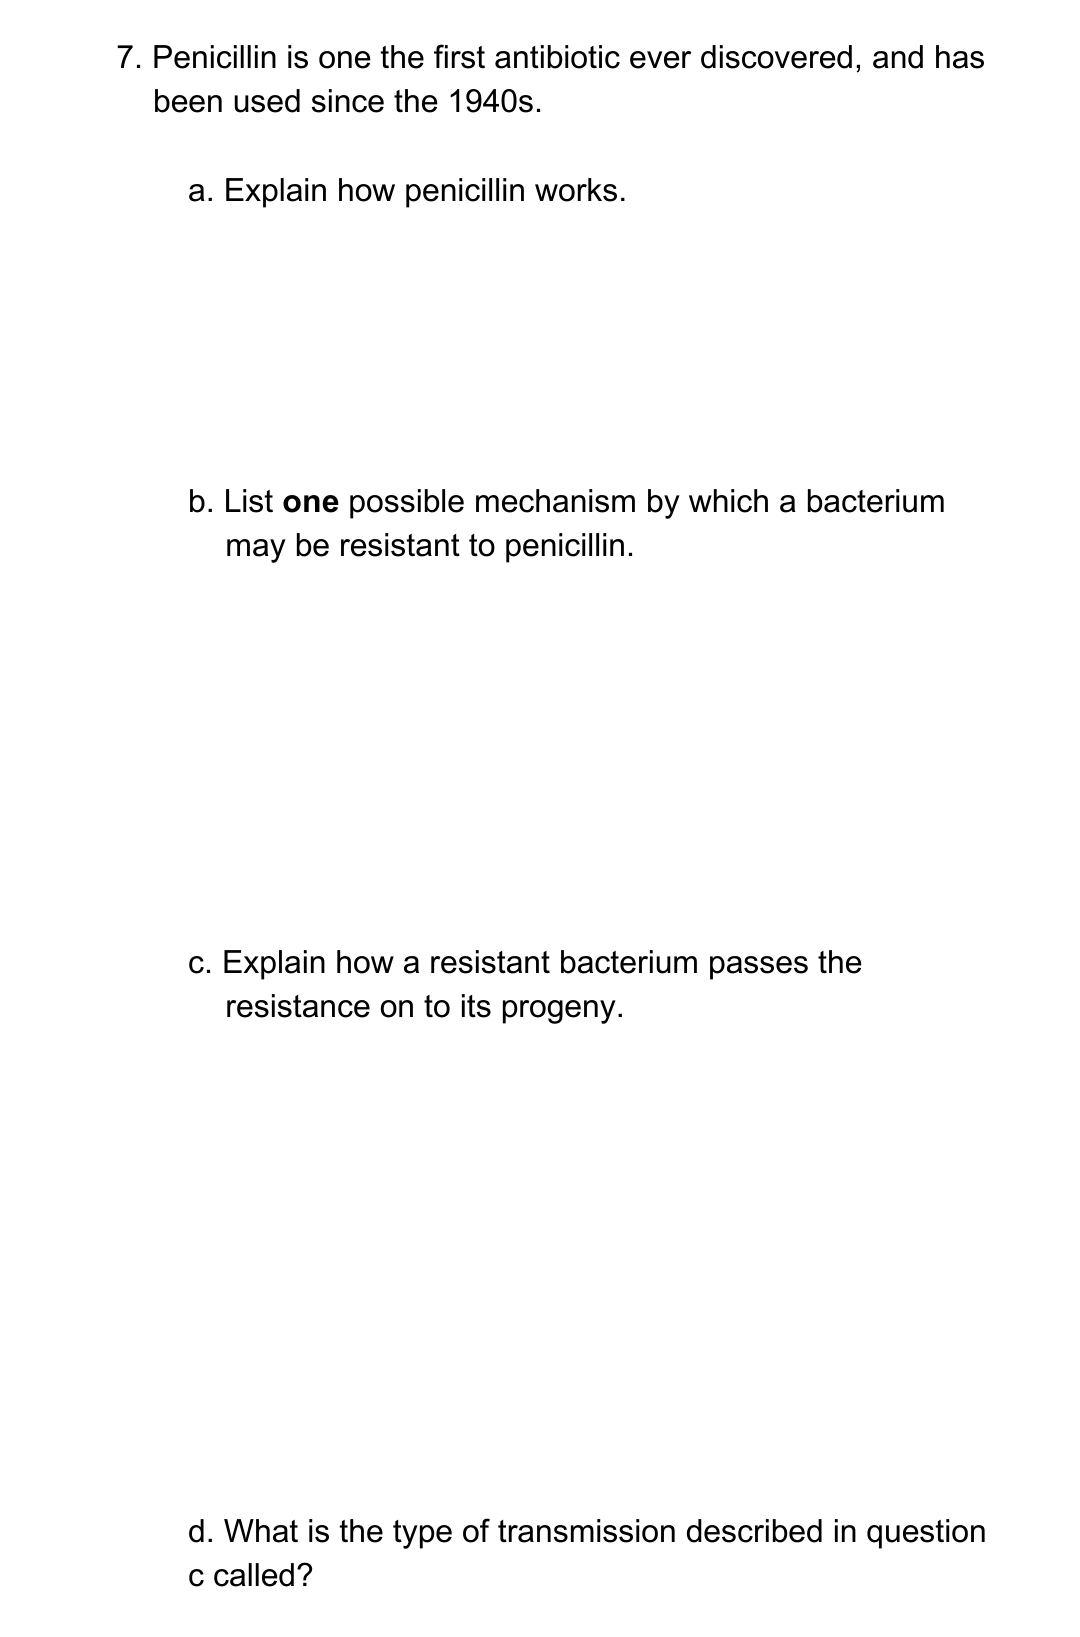 7. Penicillin is one the first antibiotic ever discovered, and has
been used since the 1940s.
a. Explain how penicillin works.
b. List one possible mechanism by which a bacterium
may be resistant to penicillin.
c. Explain how a resistant bacterium passes the
resistance on to its progeny.
d. What is the type of transmission described in question
c called?